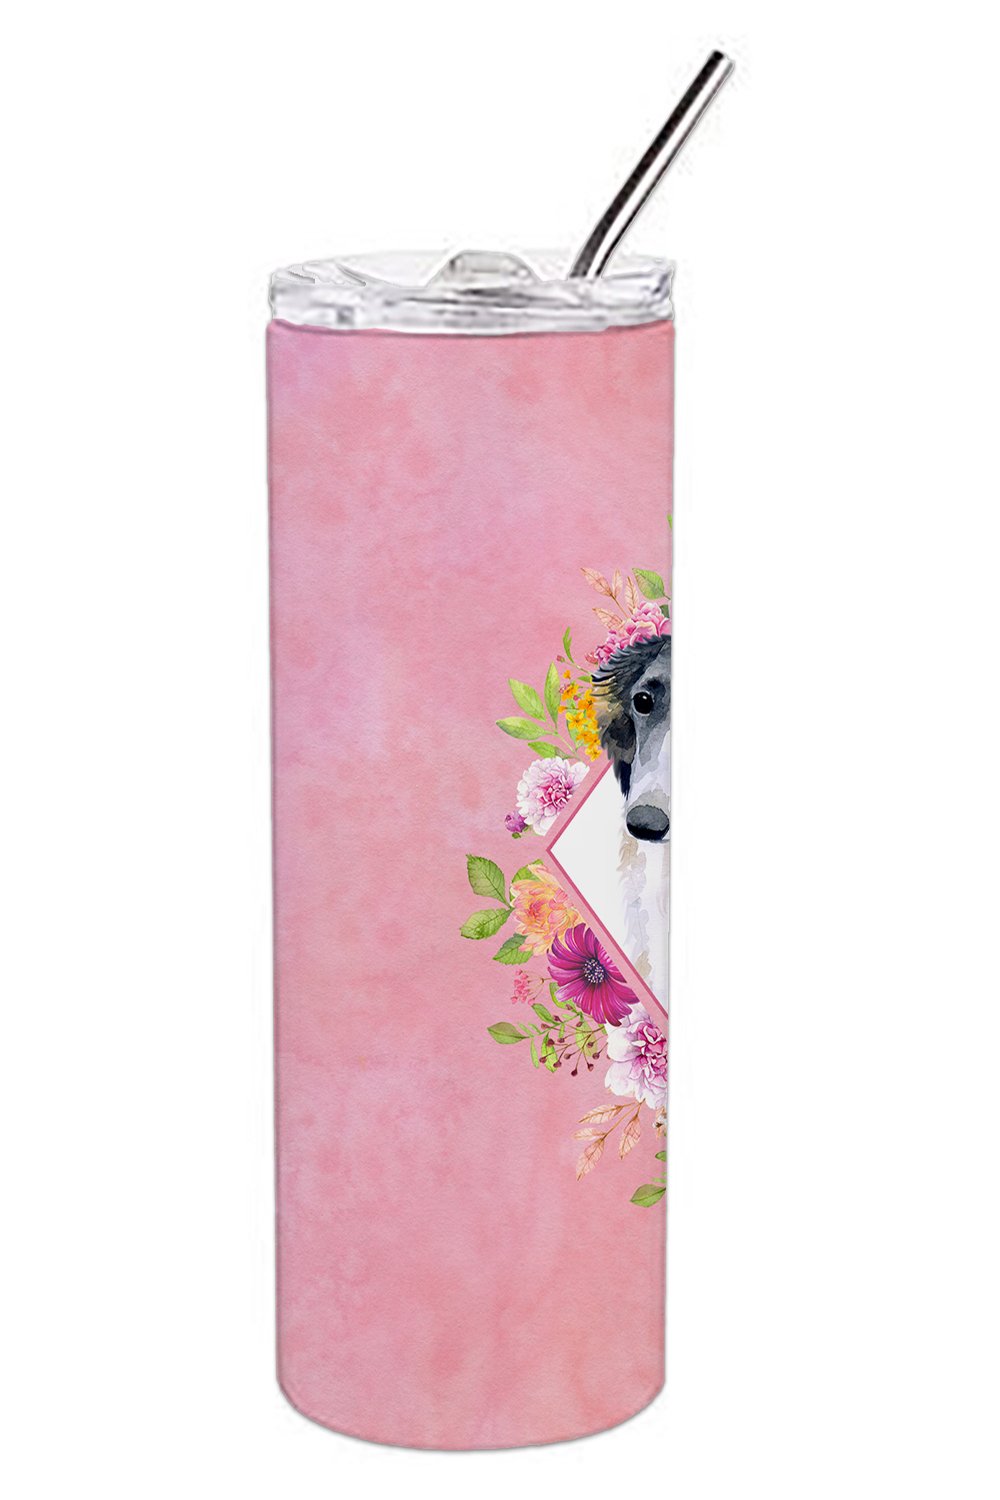 Borzoi Pink Flowers Double Walled Stainless Steel 20 oz Skinny Tumbler CK4122TBL20 by Caroline's Treasures